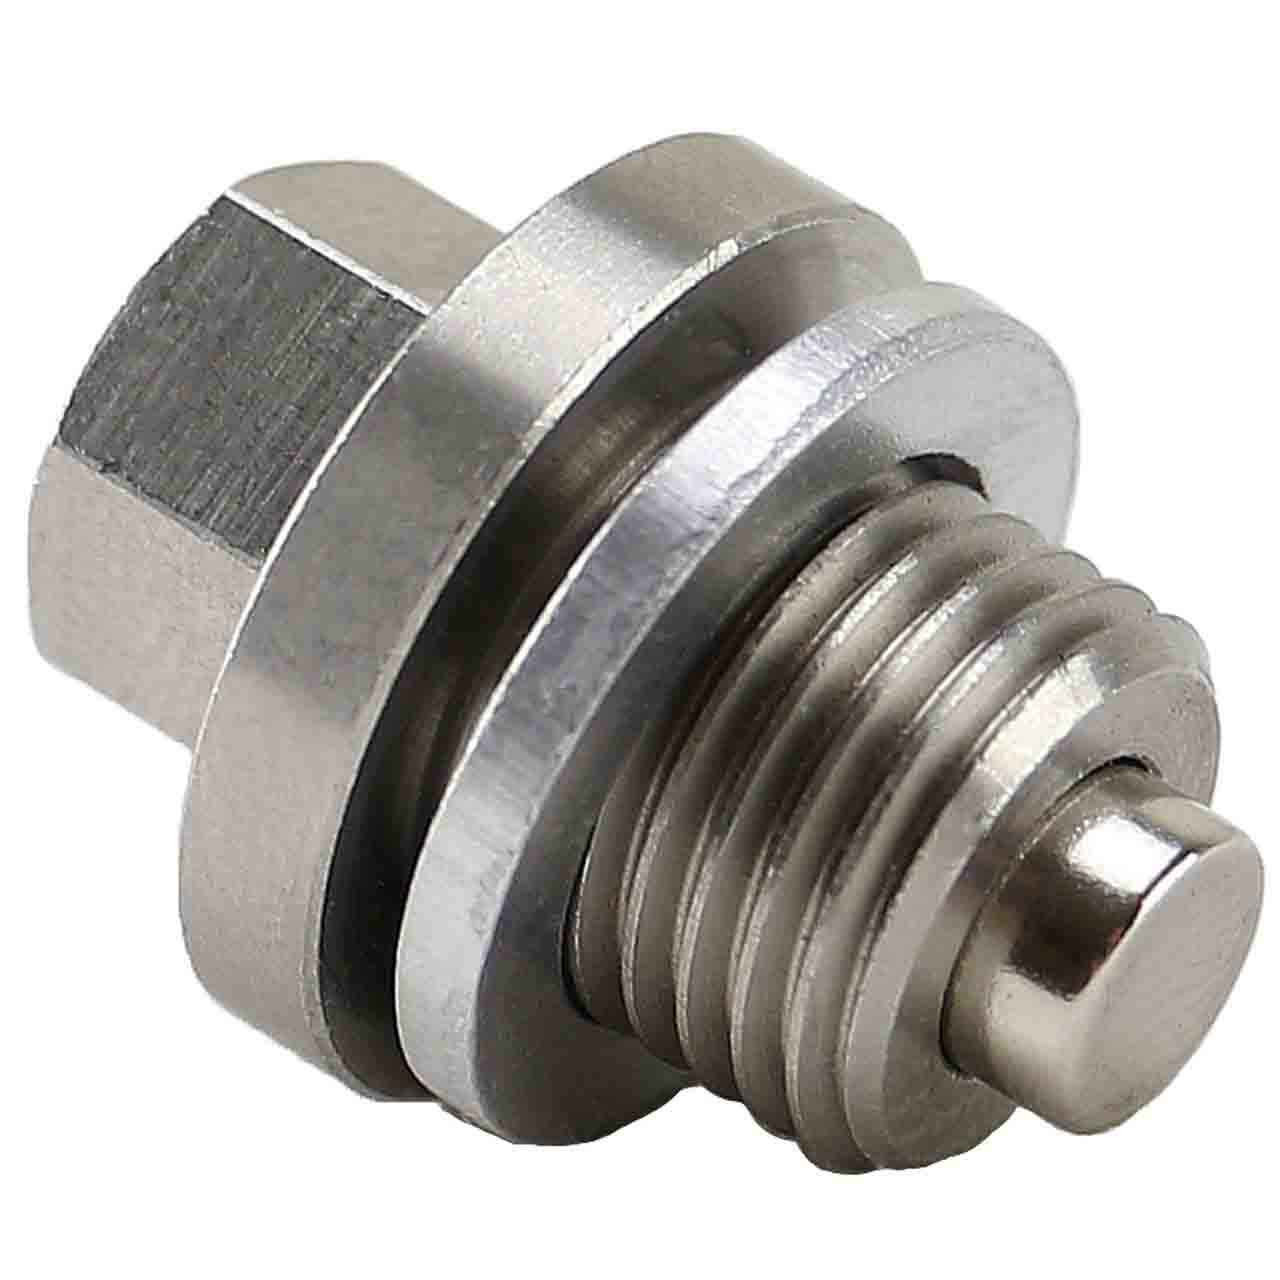 2705A011 for Mitsubishi - Stainless Steel Magnetic Oil Drain Plug with Neodymium Magnet - Made In USA